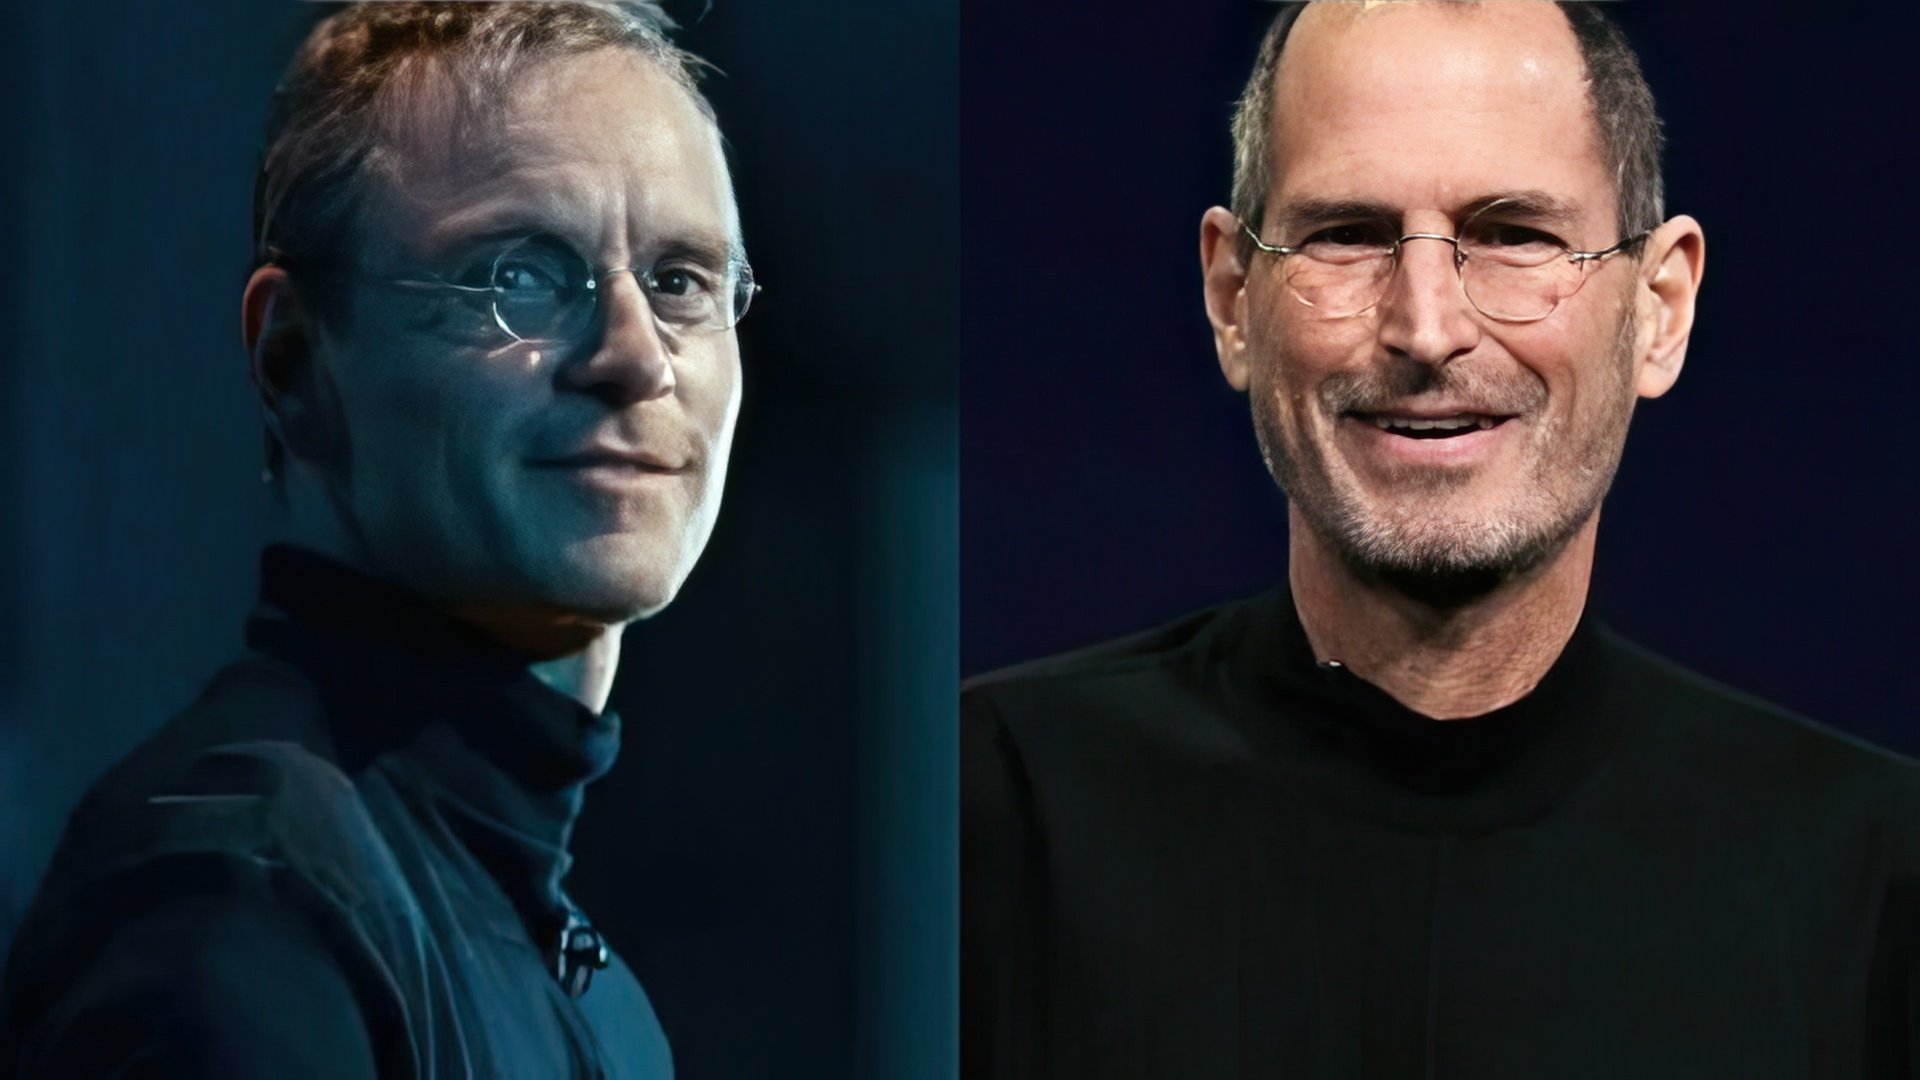 Michael Fassbender and the real Steve Jobs